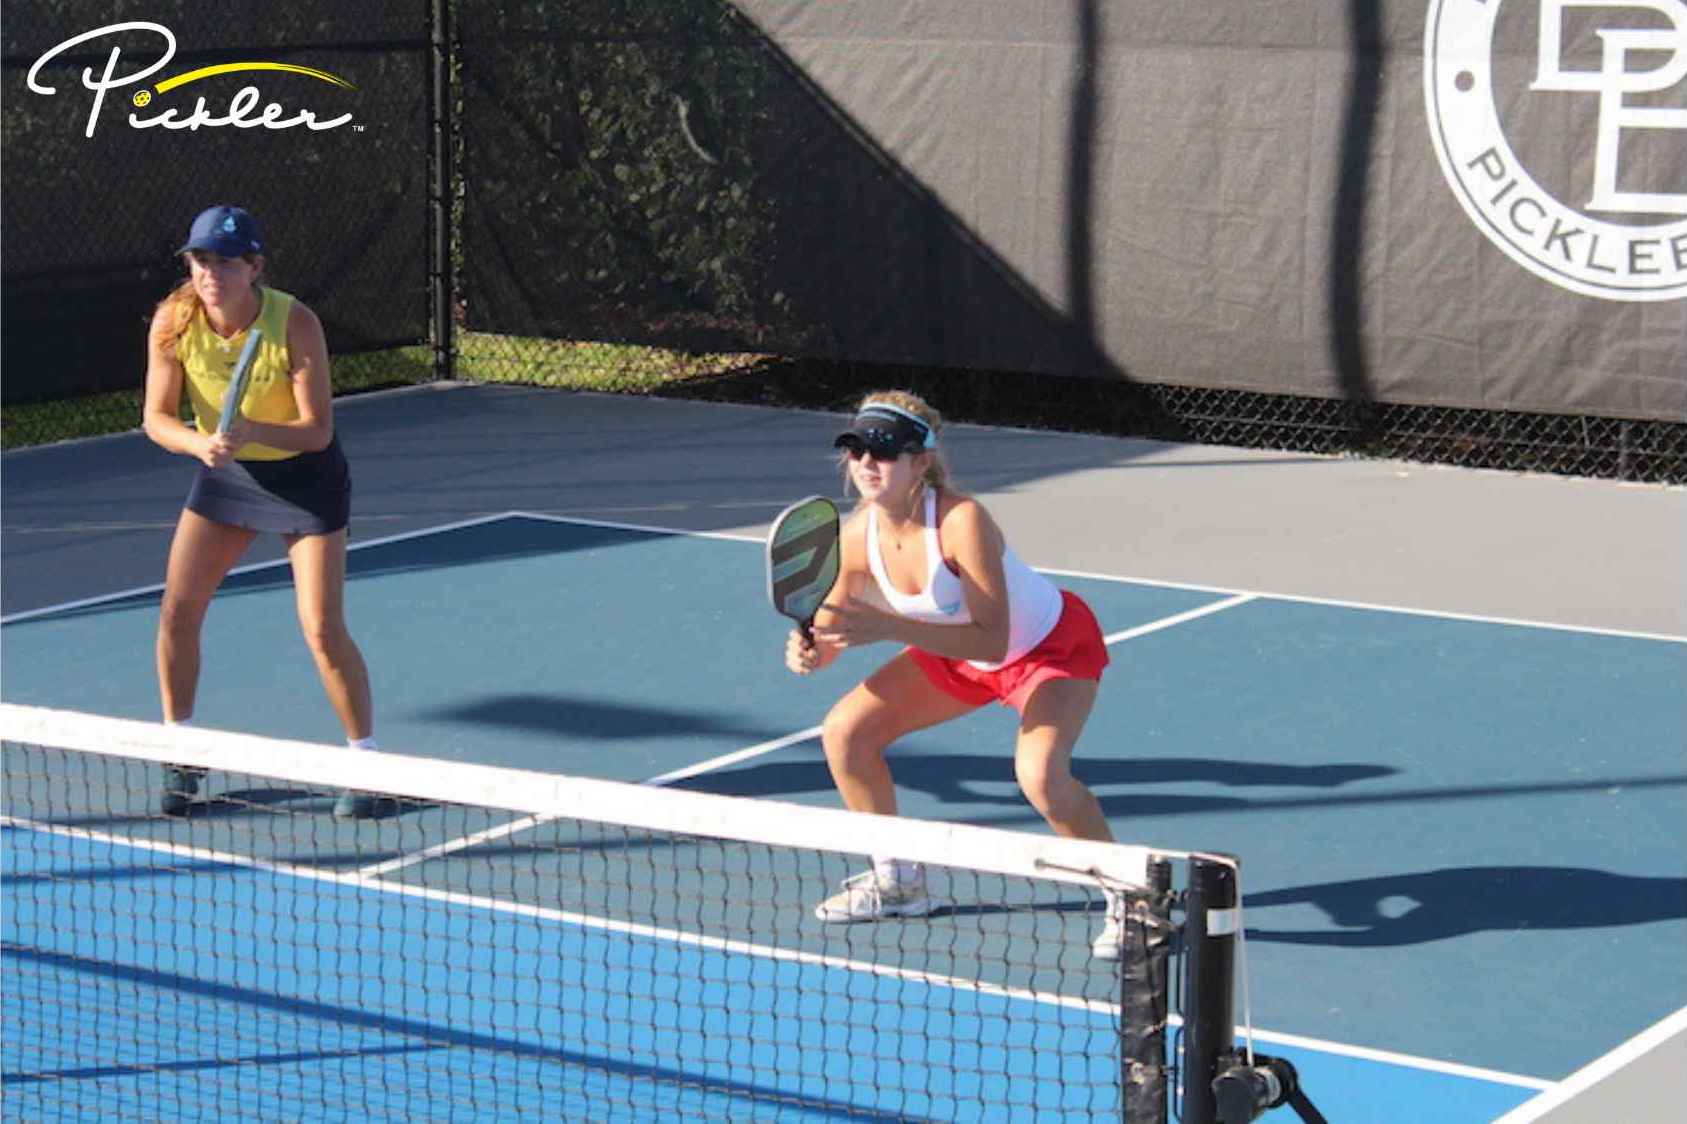 11 Tips to Stay Balanced on the Pickleball Court